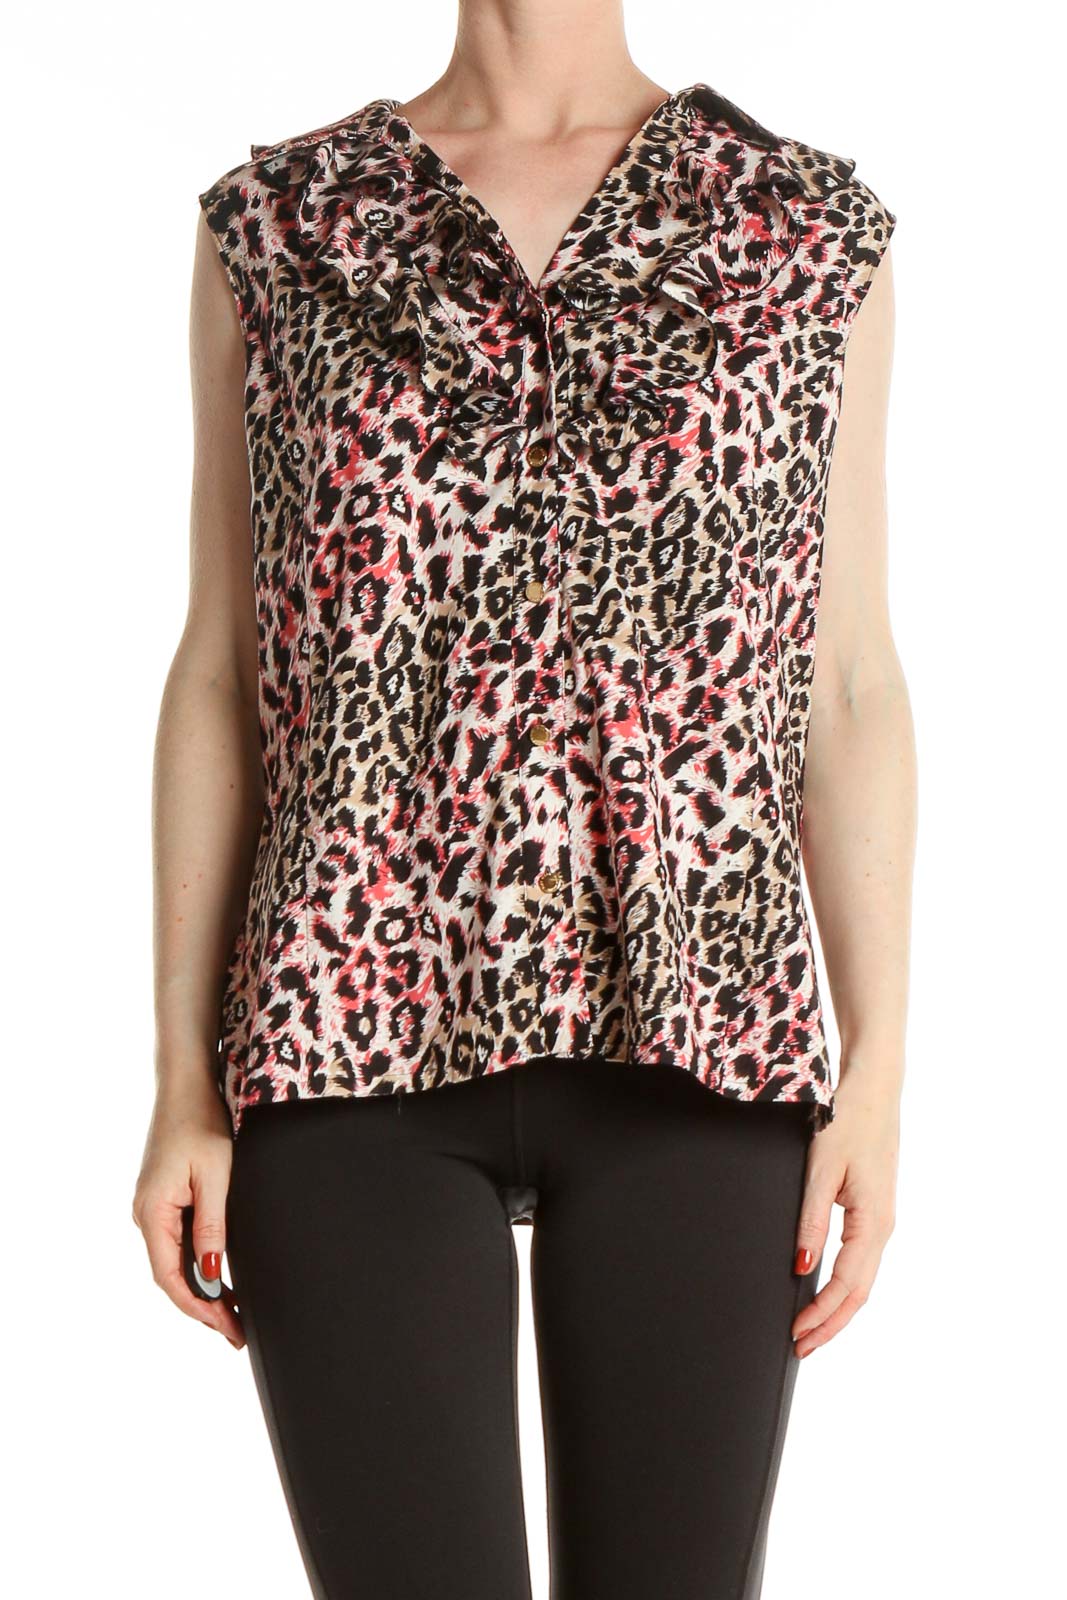 Brown Animal Print All Day Wear Blouse Front